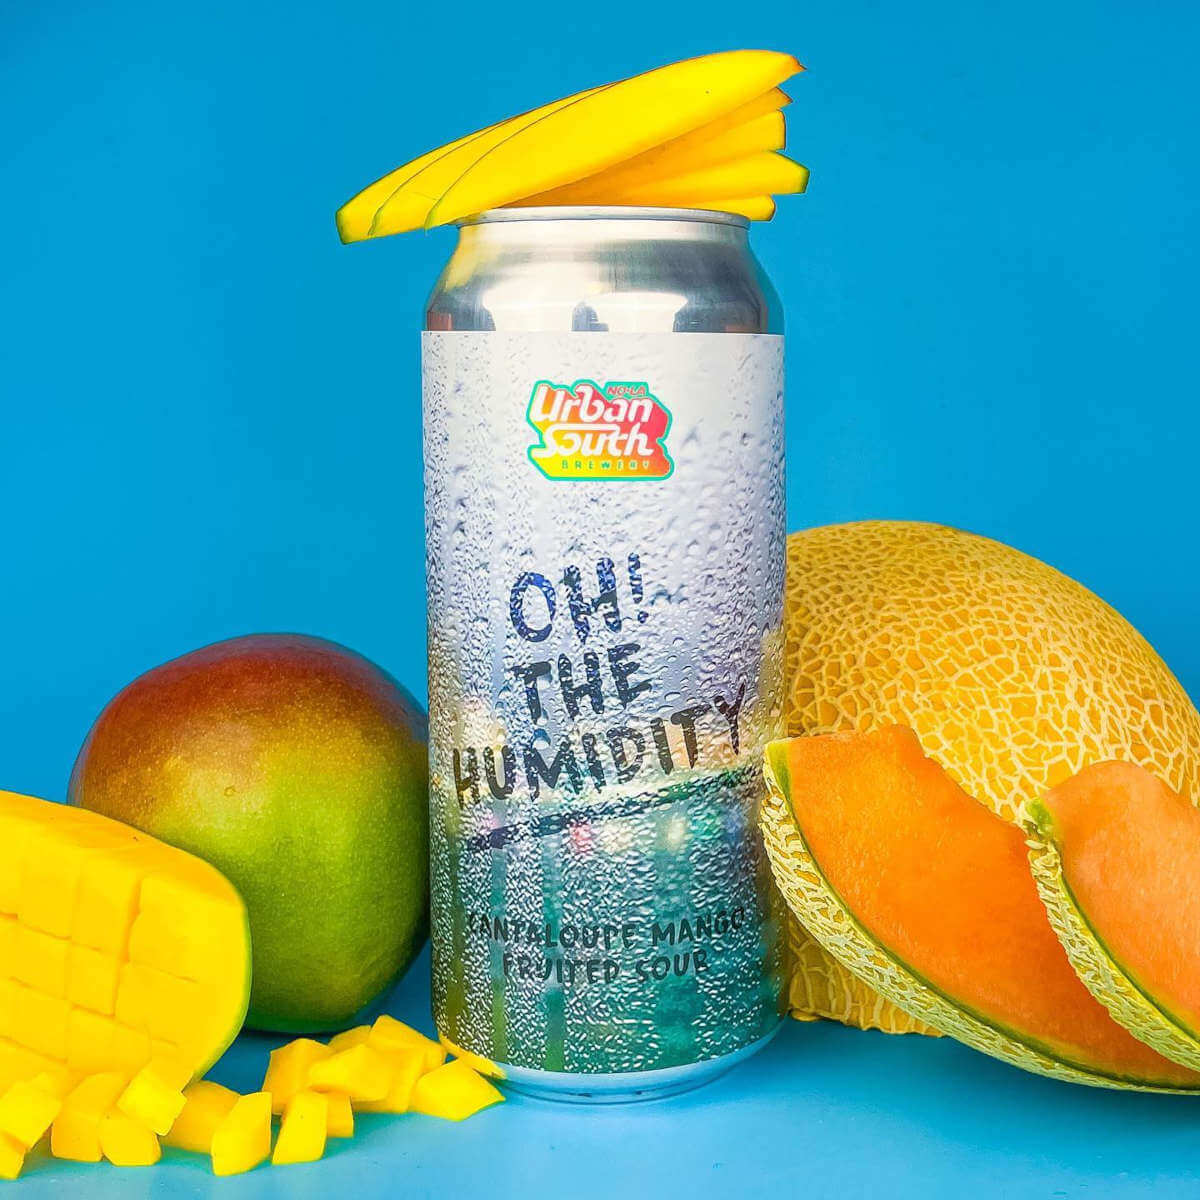 Urban South Brewery releases Oh! The Humidity fruited sour